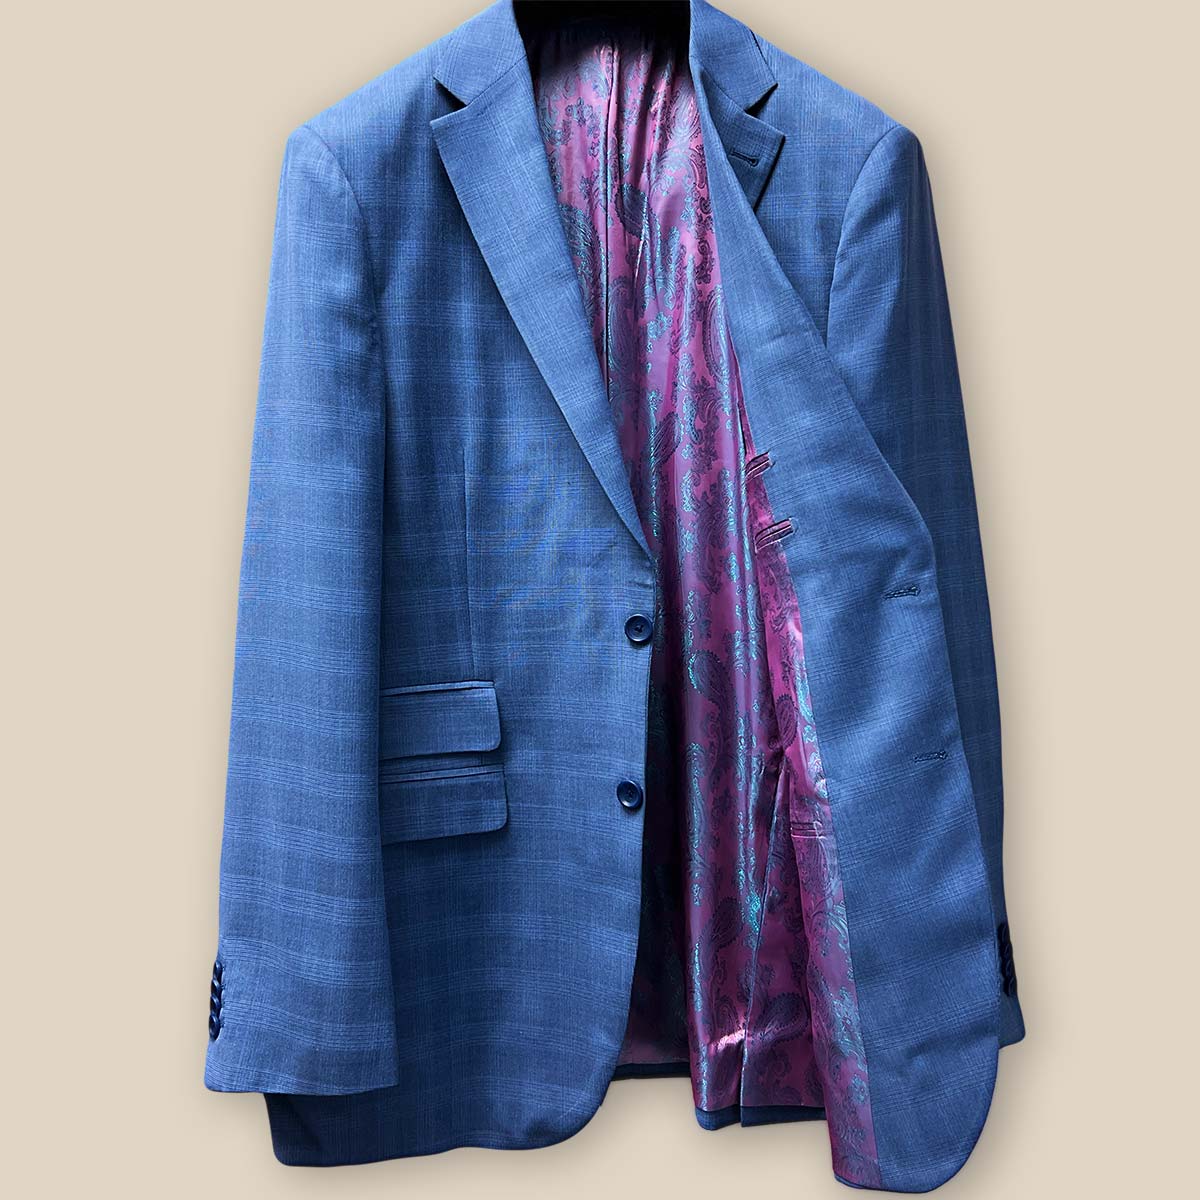 The inside left view of a medium blue Prince of Wales glen plaid suit jacket, showcasing the pink and purple iridescent paisley lining.